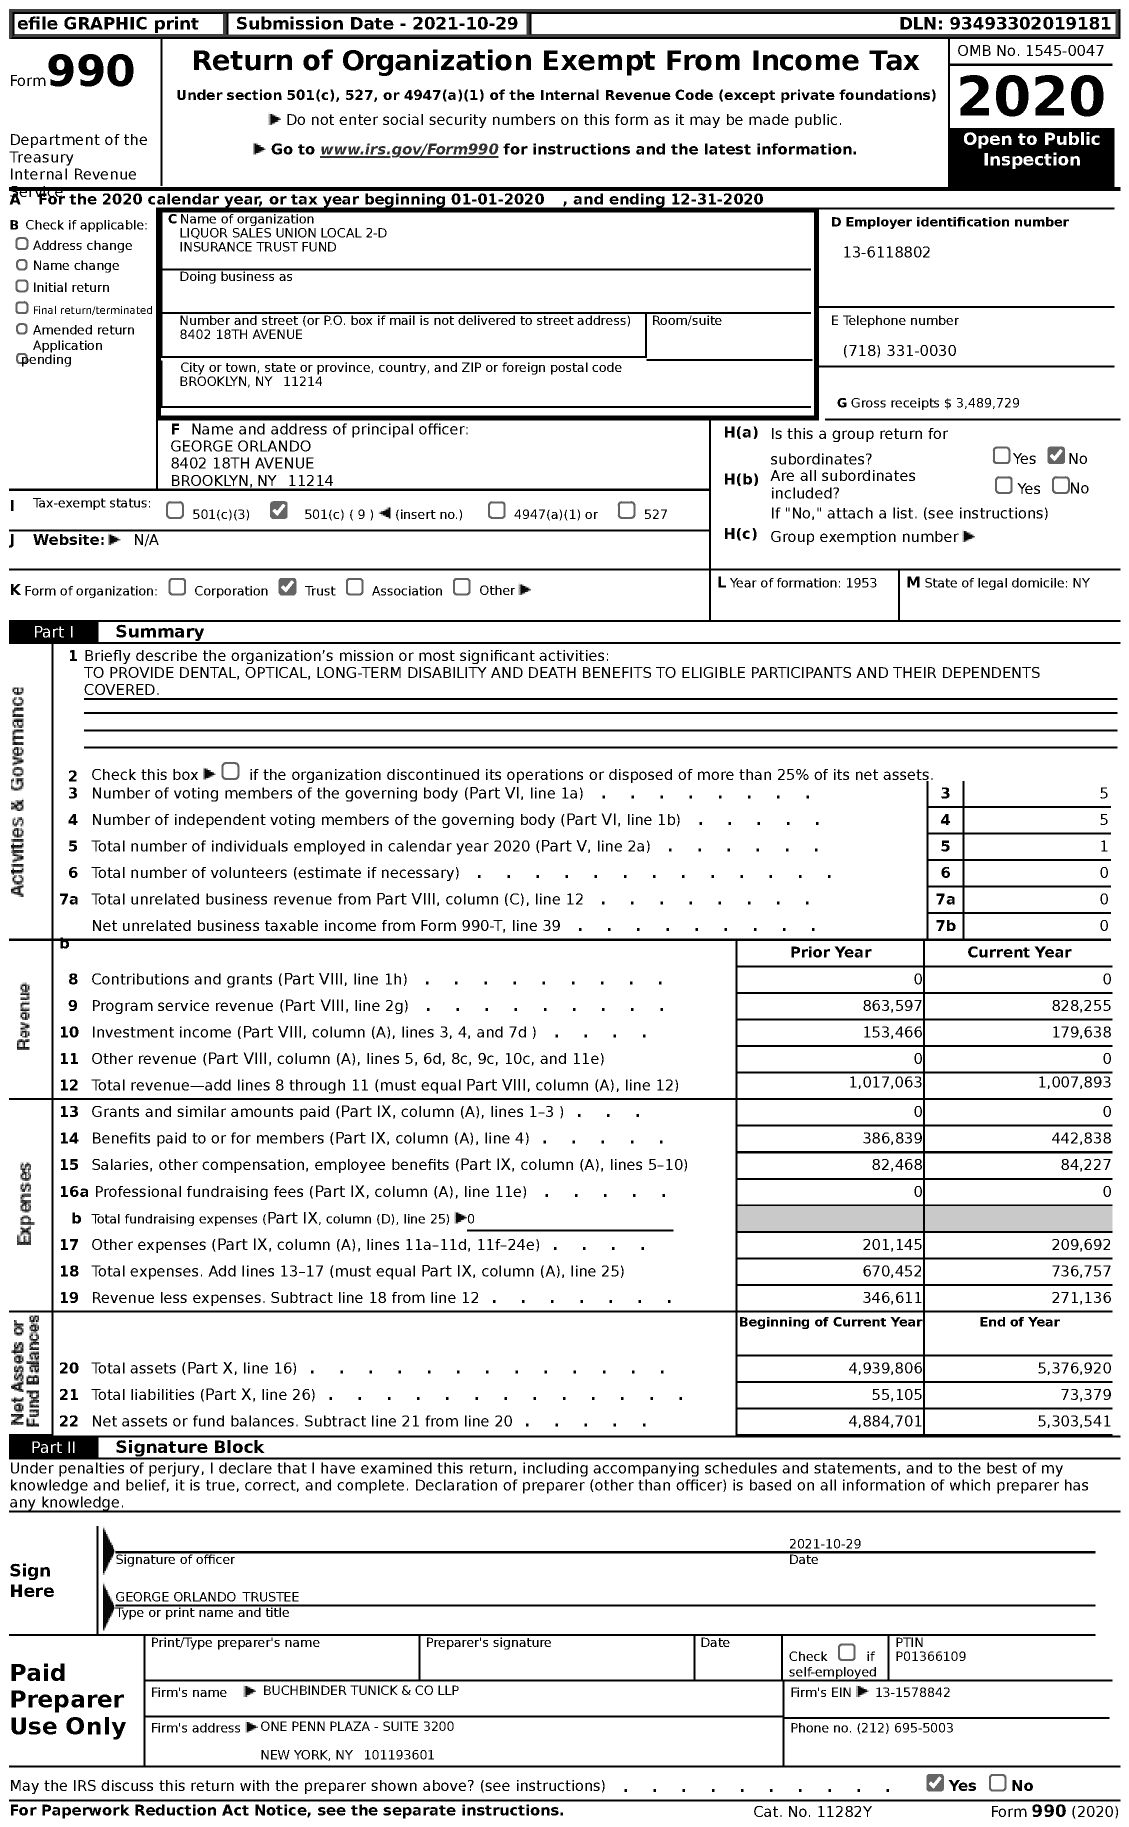 Image of first page of 2020 Form 990 for Liquor Sales Union Local 2-d Insurance Trust Fund